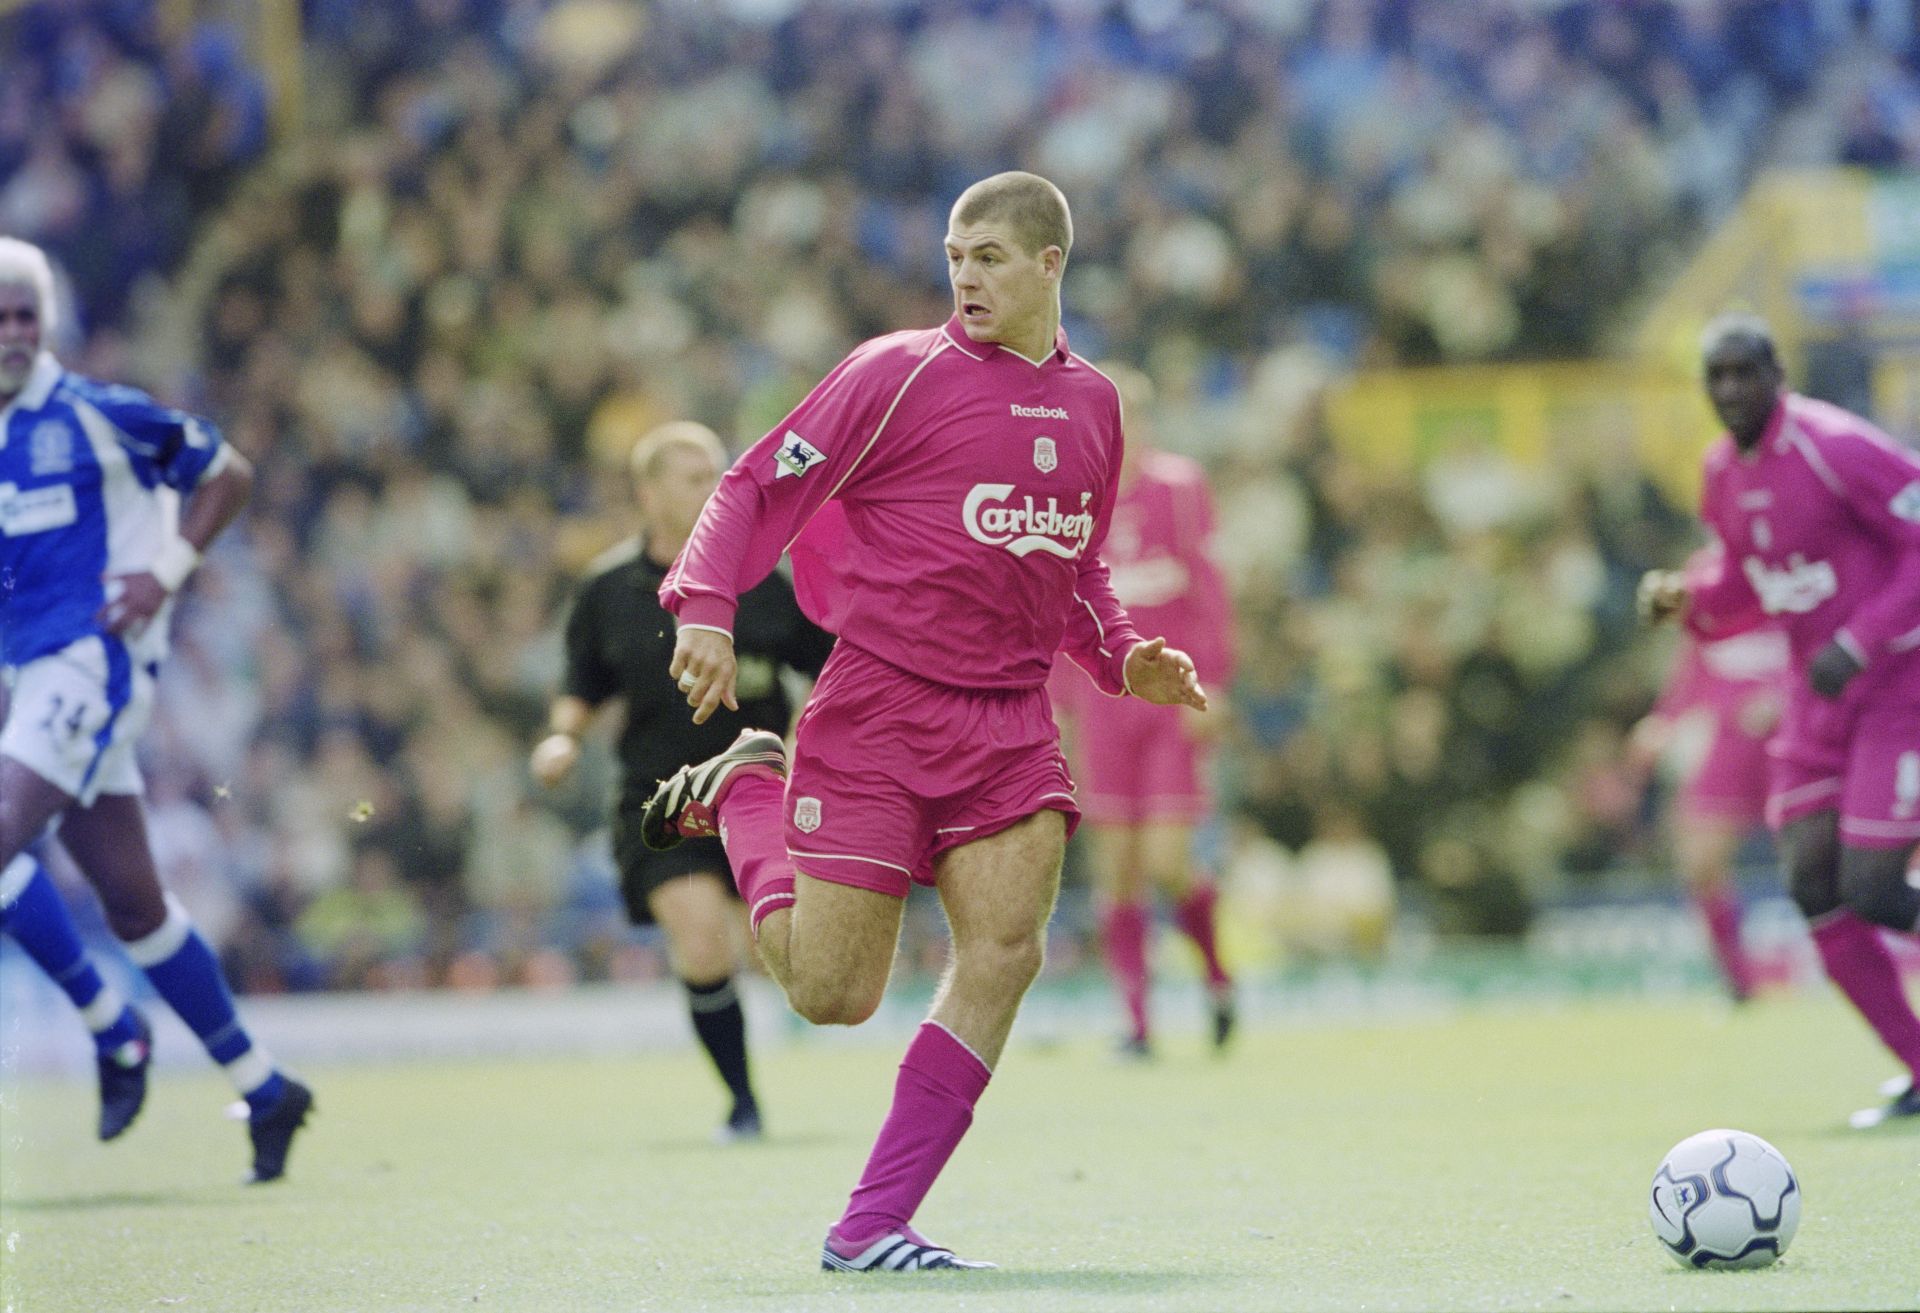 Steven Gerrard enjoyed a fabulous career in the English top flight with Liverpool